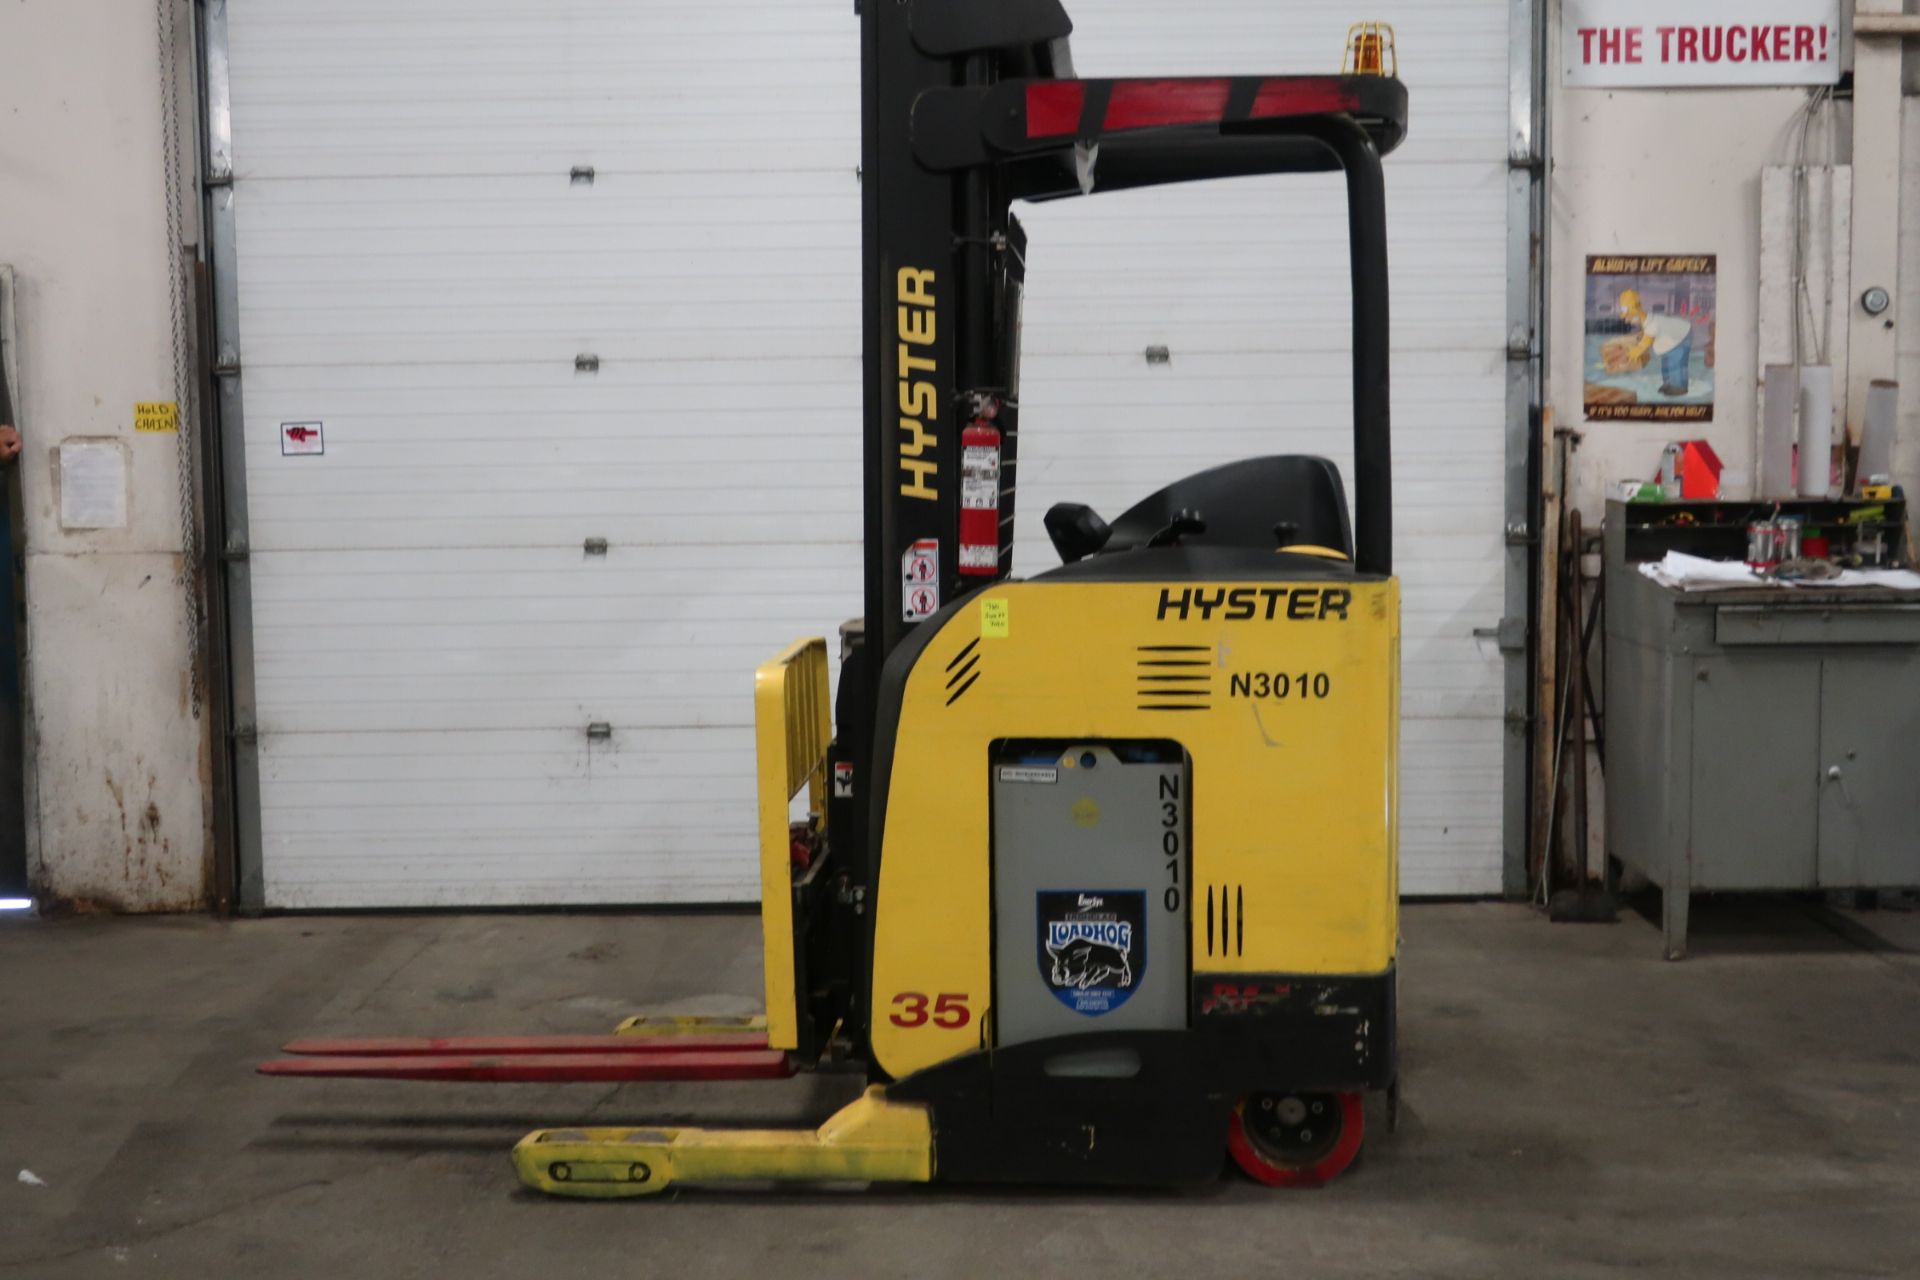 FREE CUSTOMS - 2012 Hyster Reach Truck Pallet Lifter with LOW HOURS and 3-stage electric with